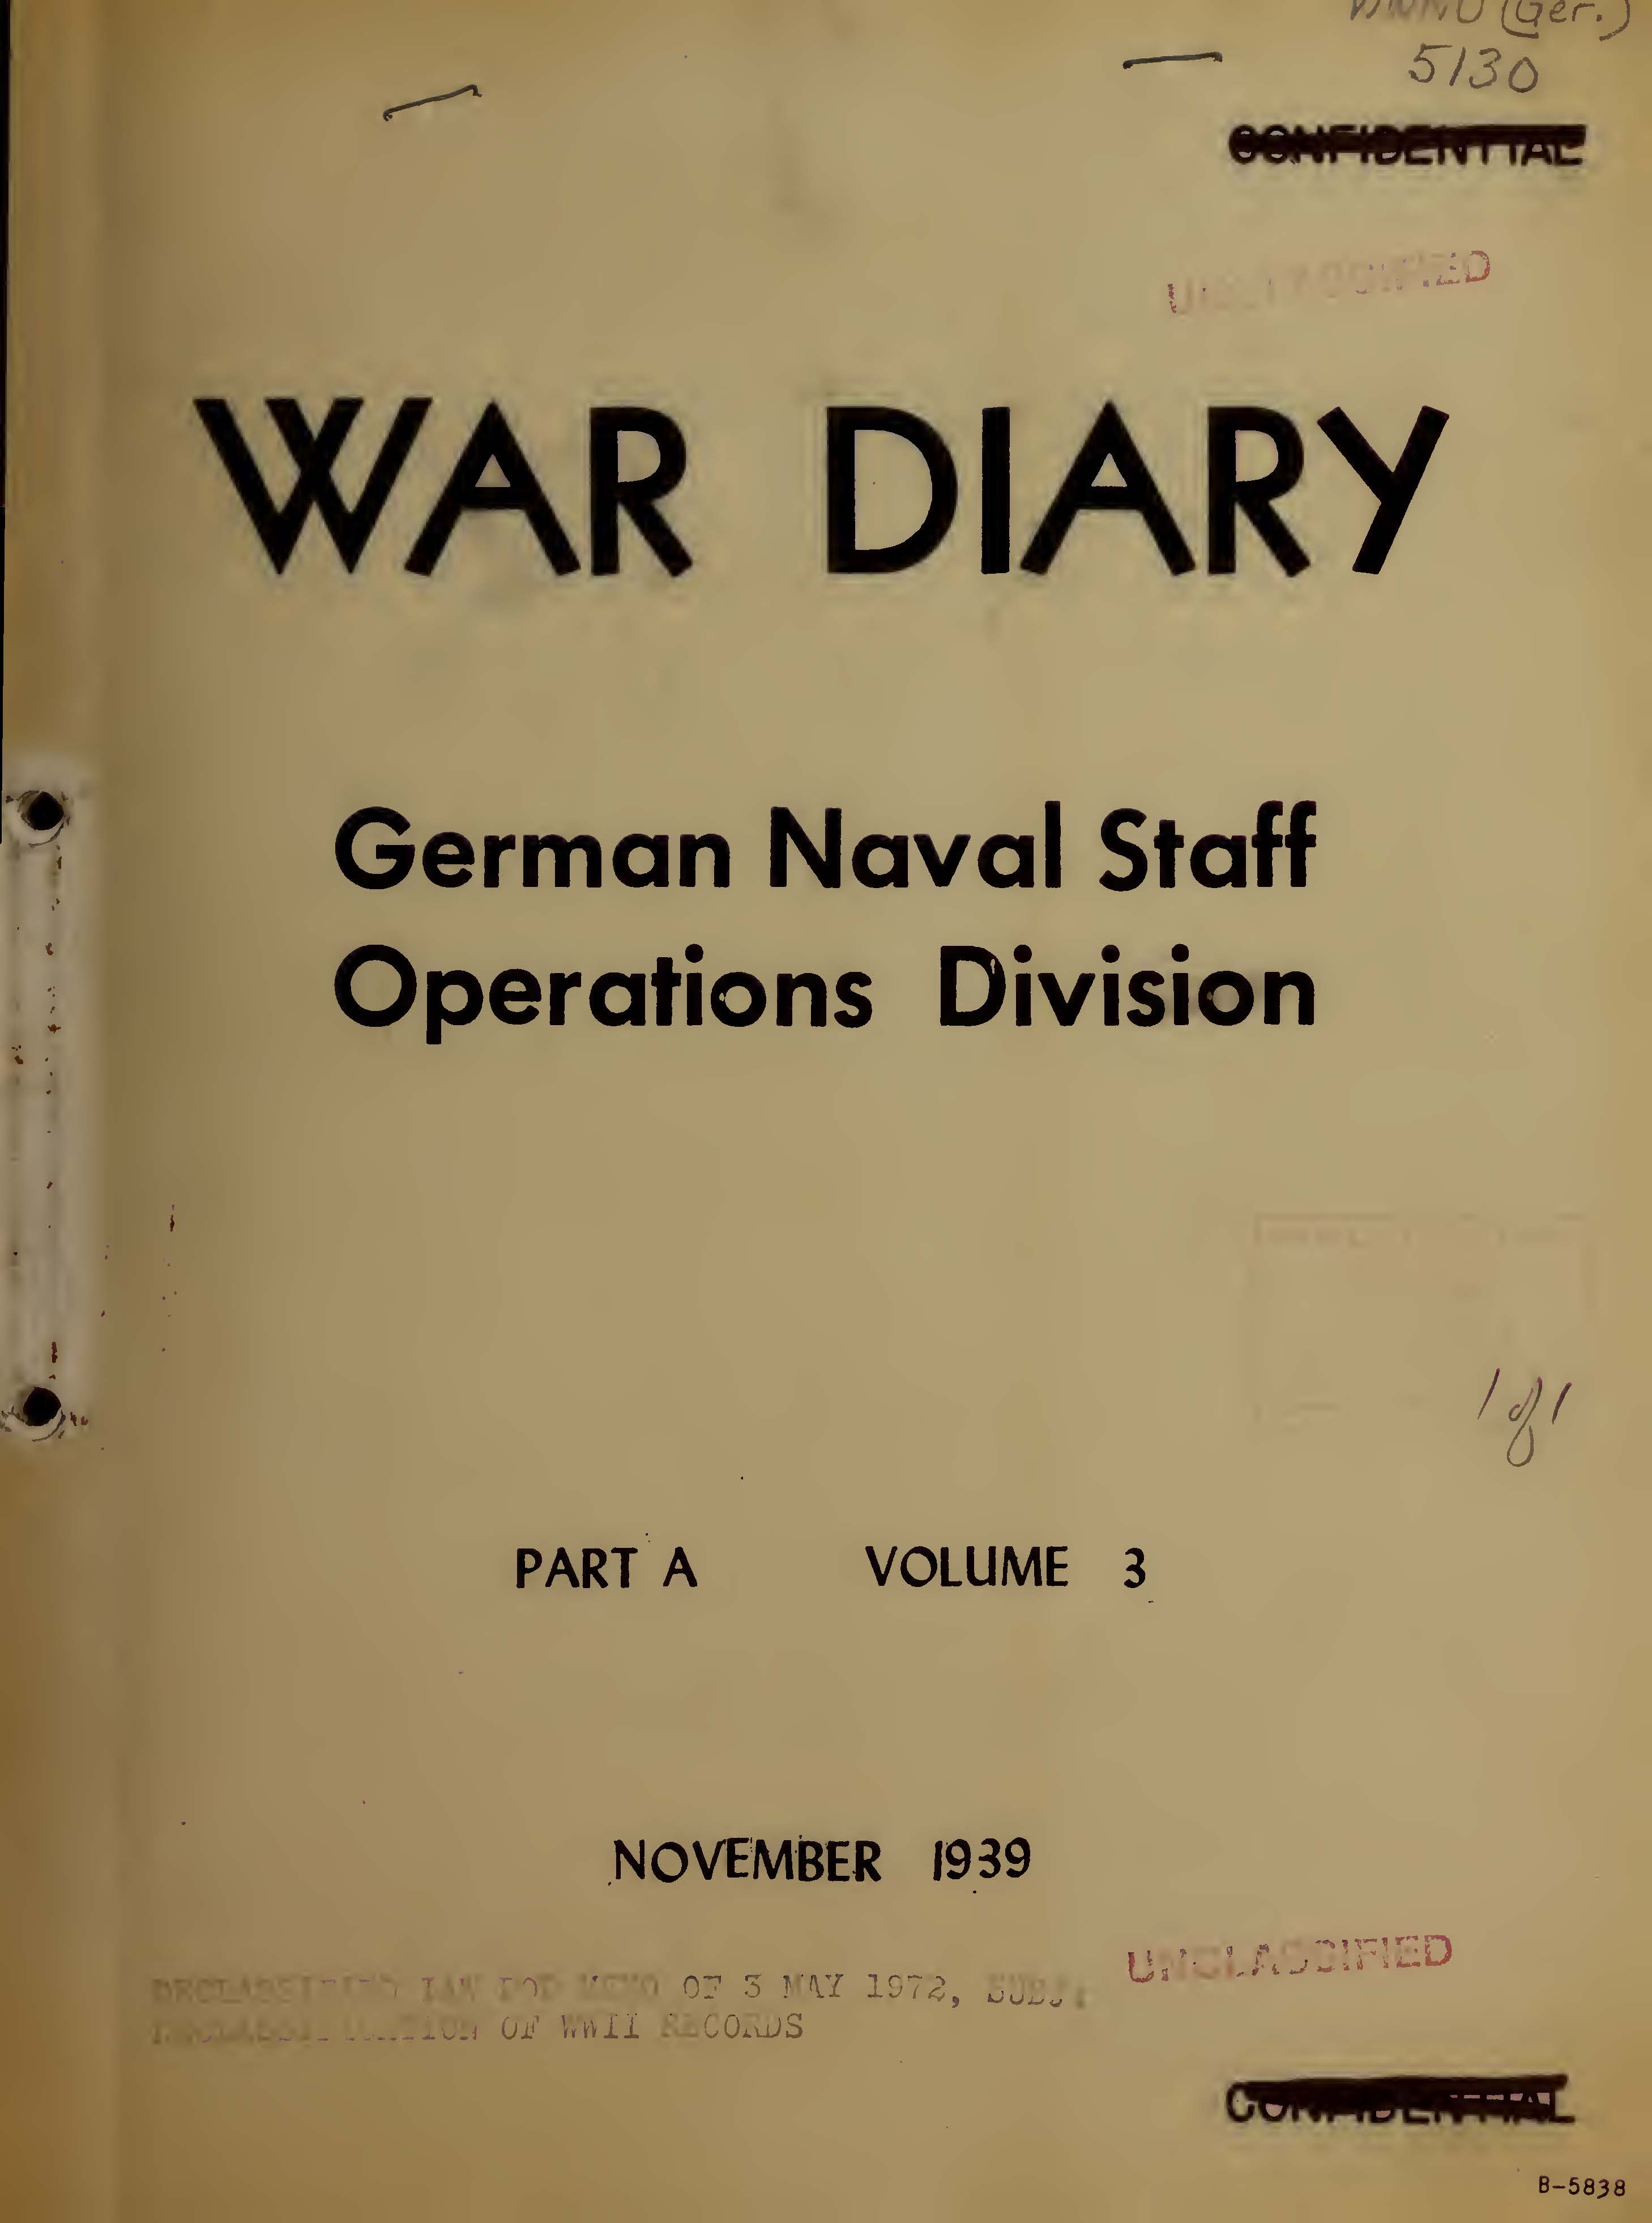 War Diary of German Naval Staff (Operations Division) Part A, Volume 3, November 1939